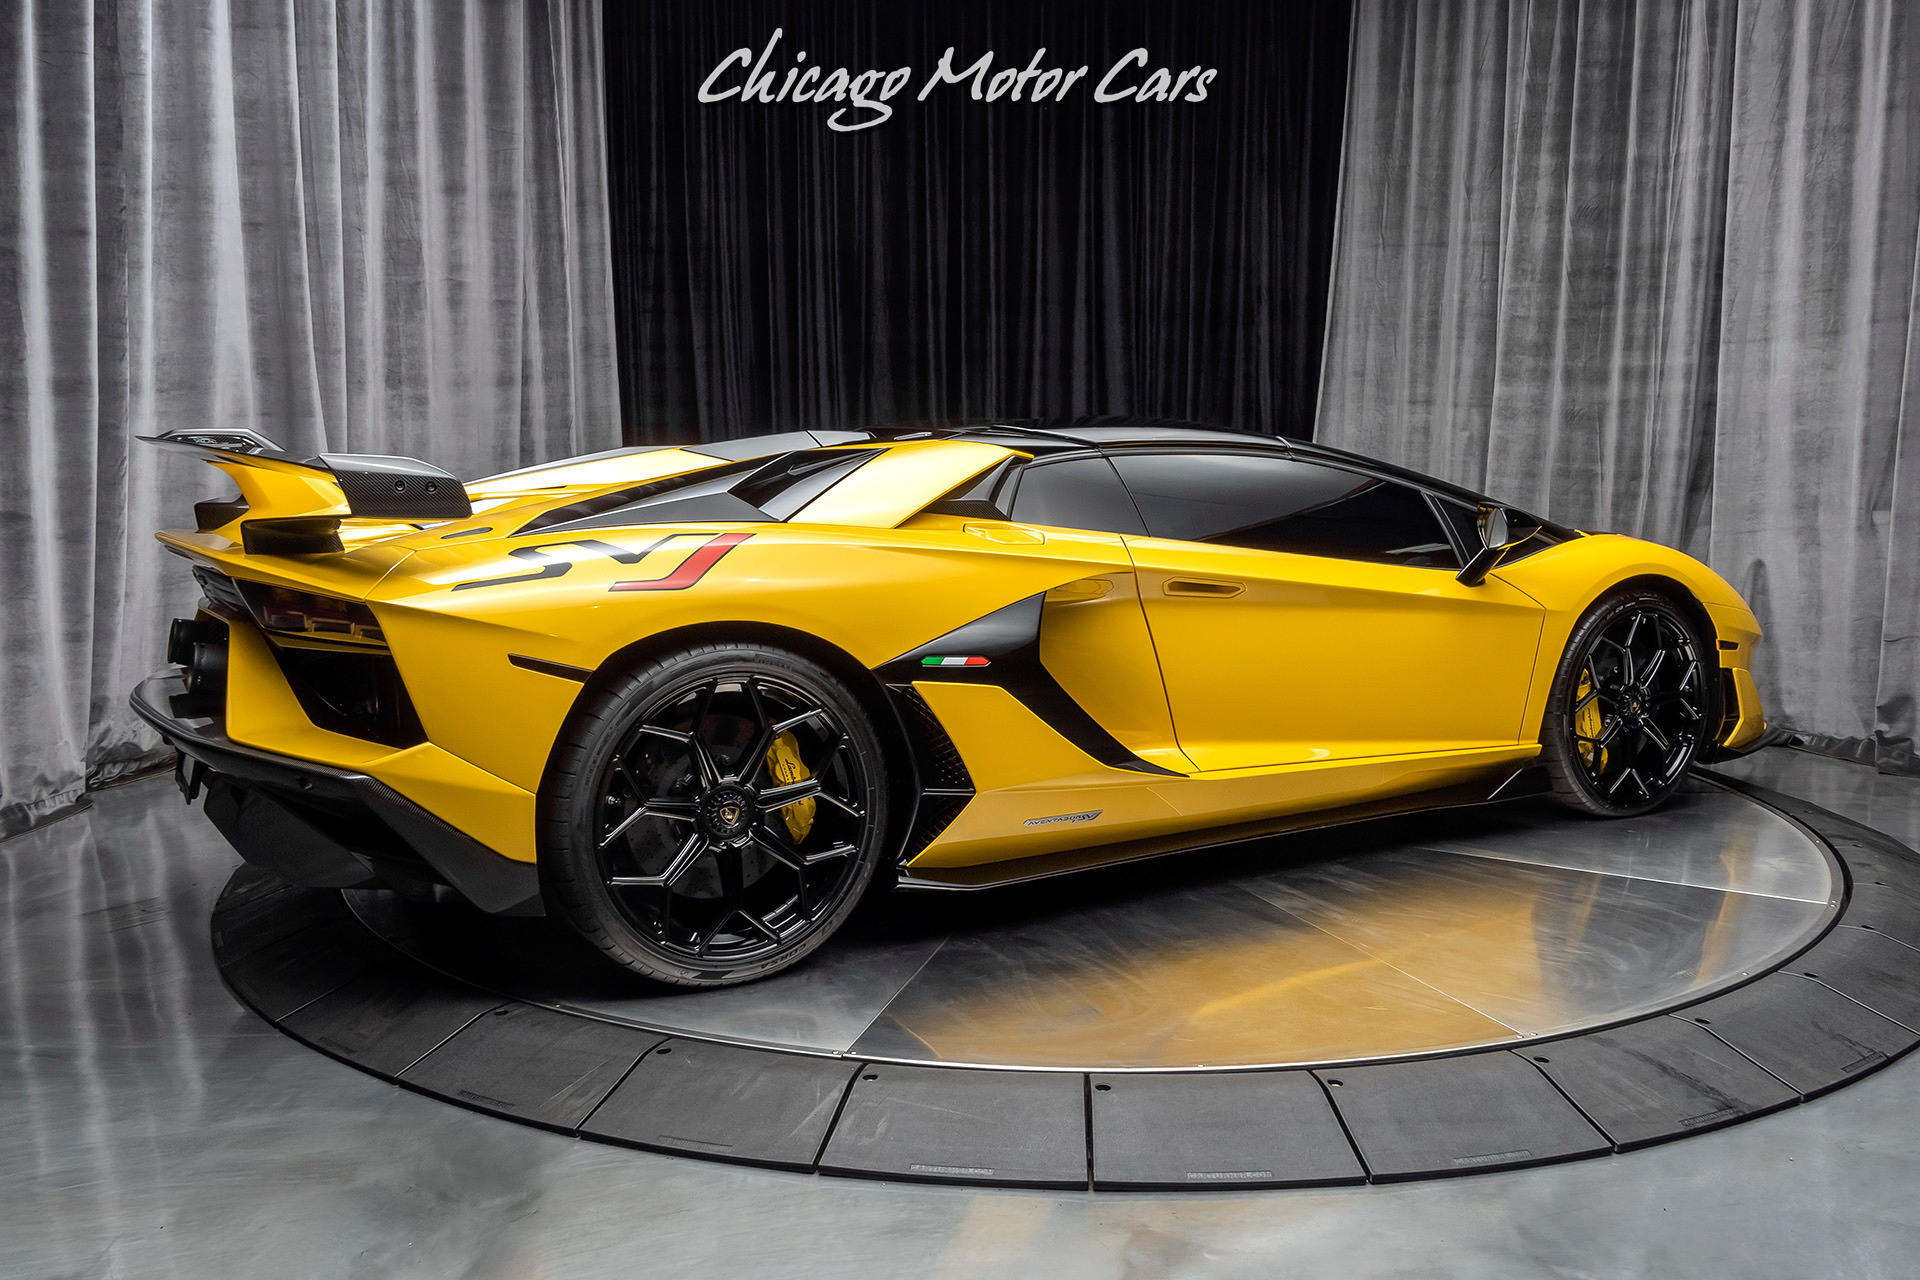 Used Lamborghini Aventador Svj Roadster Only 263 Miles New Giallo Orion Rare For Sale Special Pricing Chicago Motor Cars Stock